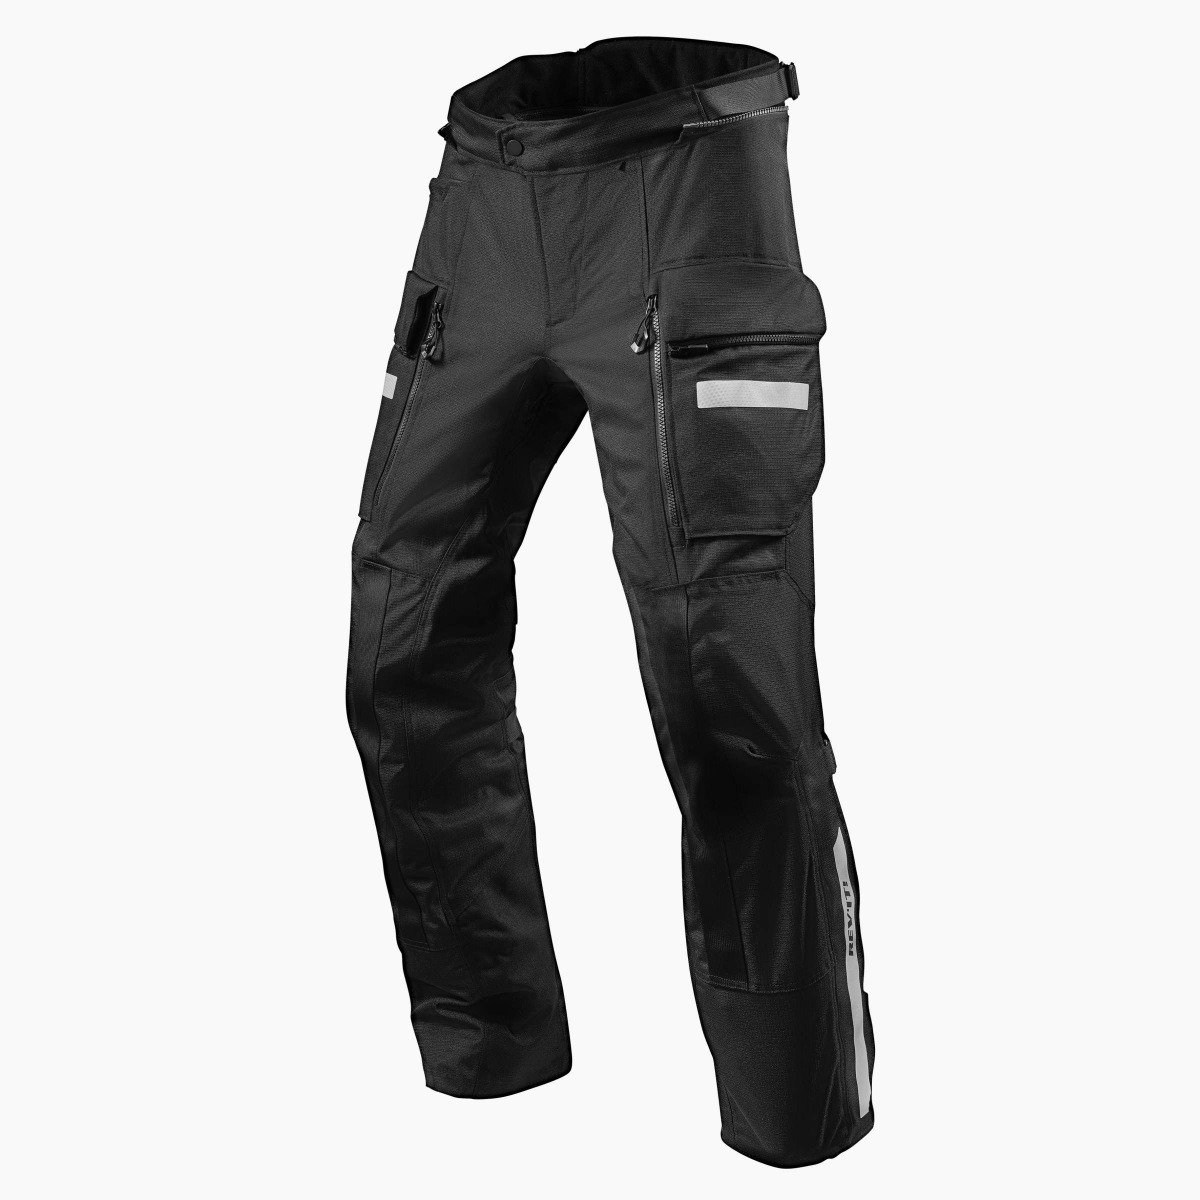 Image of REV'IT! Sand 4 H2O Short Black Motorcycle Pants Size L ID 8700001316330